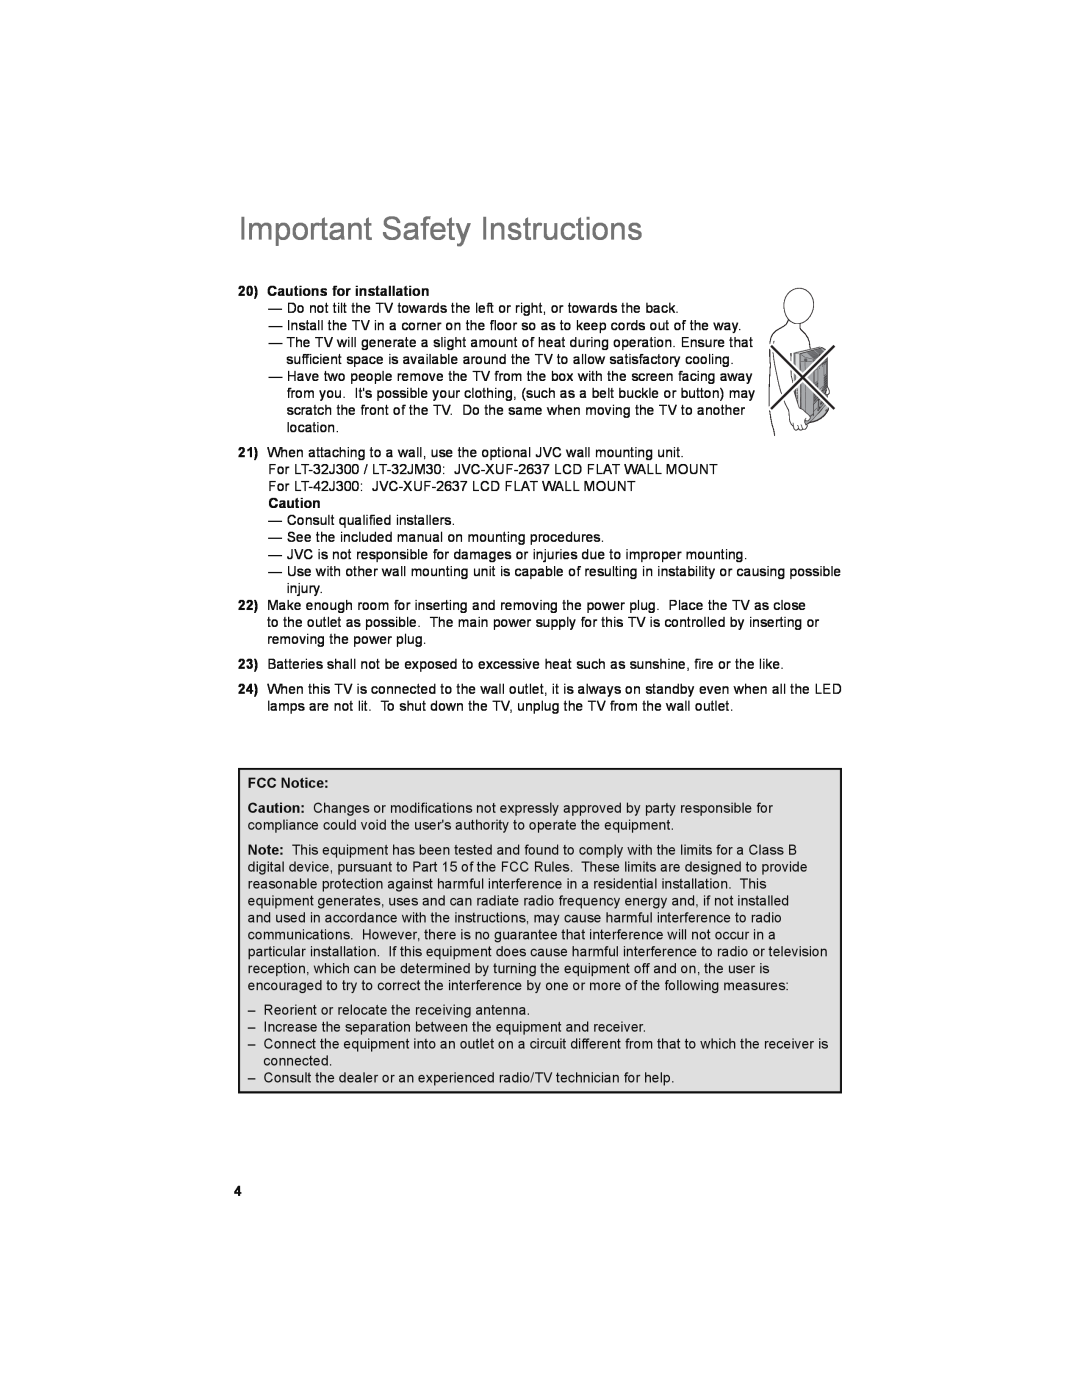 JVC LT-32JM30 manual Important Safety Instructions, Cautions for installation, FCC Notice 